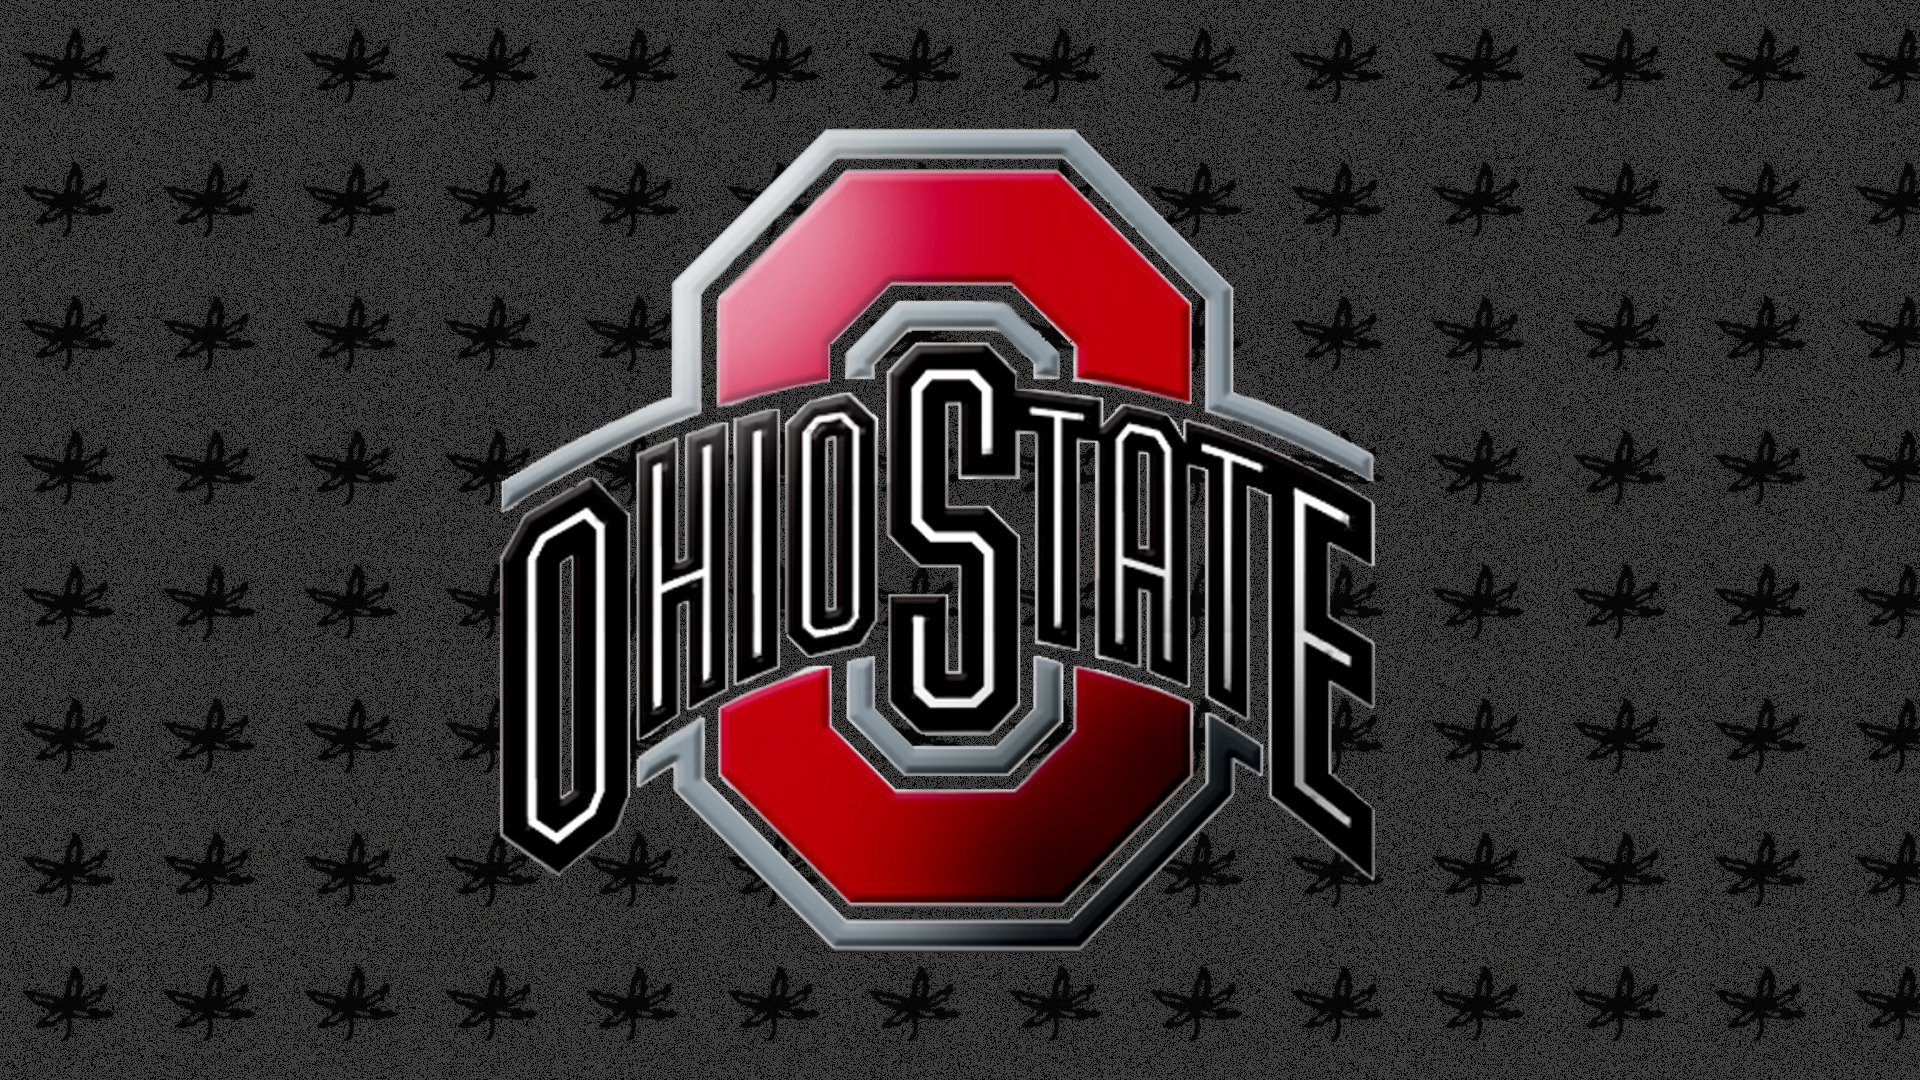 Ohio State Football images OSU Desktop Wallpaper 55 HD wallpaper and